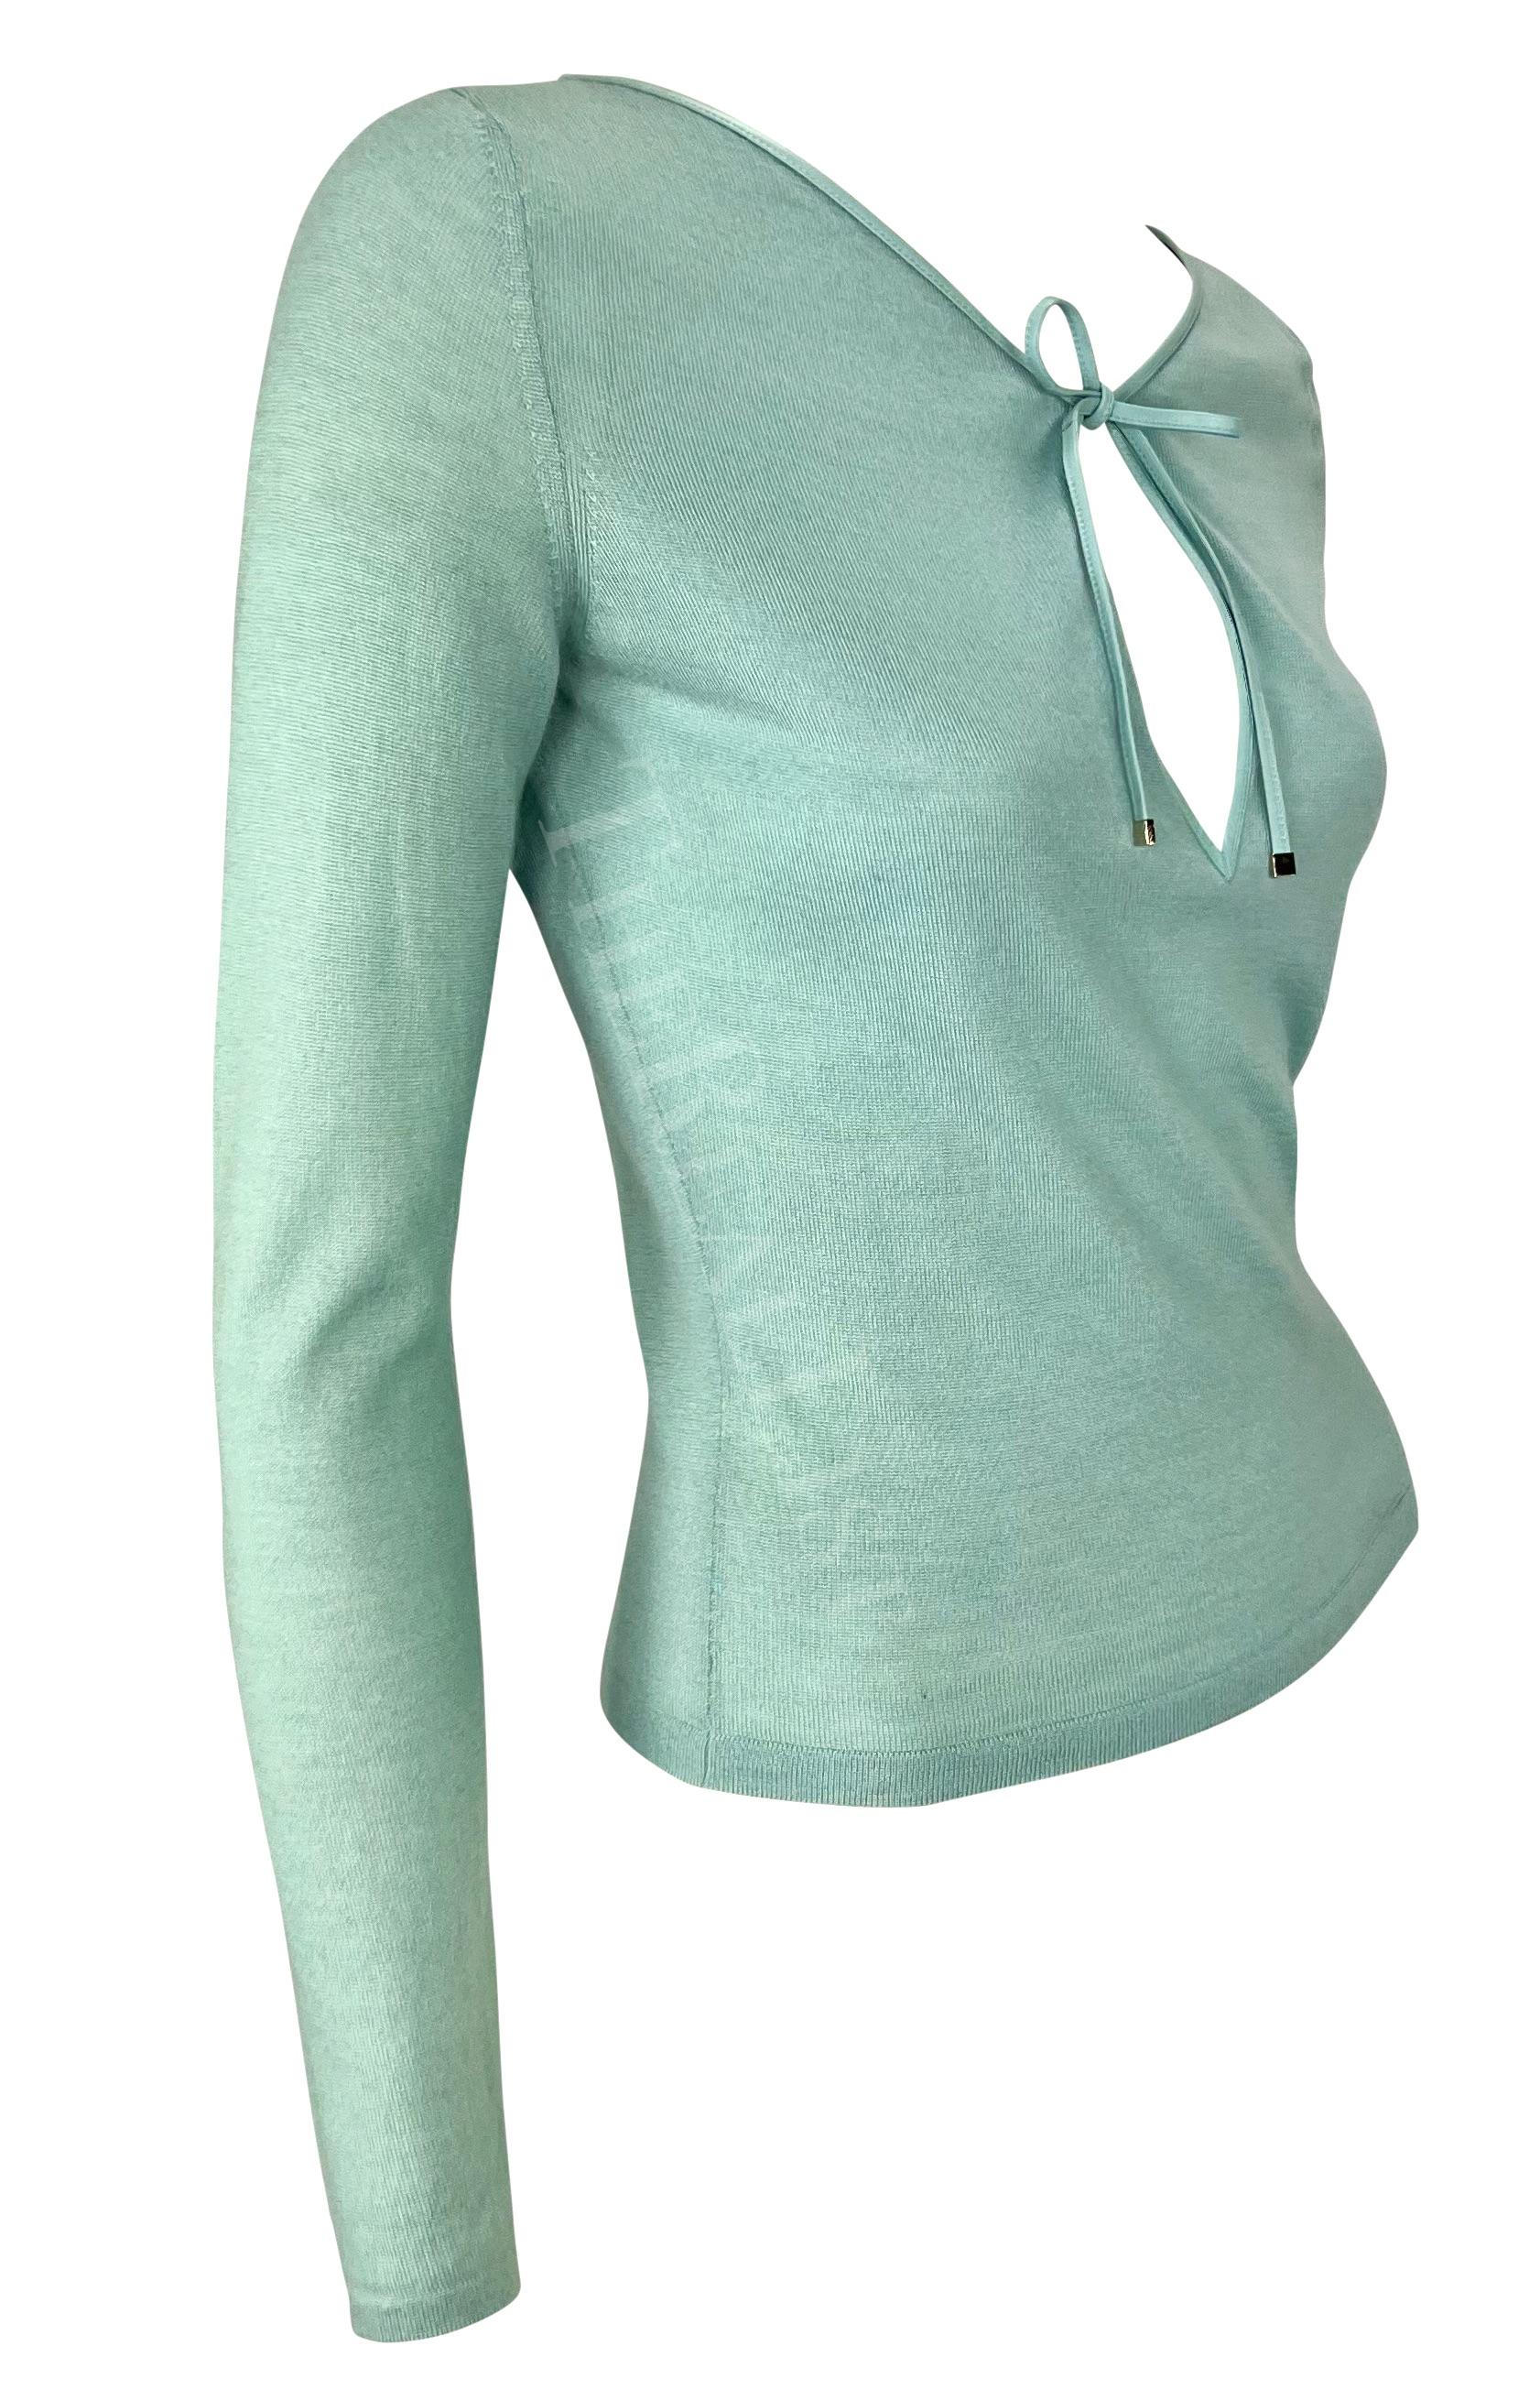 S/S 2000 Gucci by Tom Ford Baby Blue Knit Leather Tie Plunging Top For Sale 2